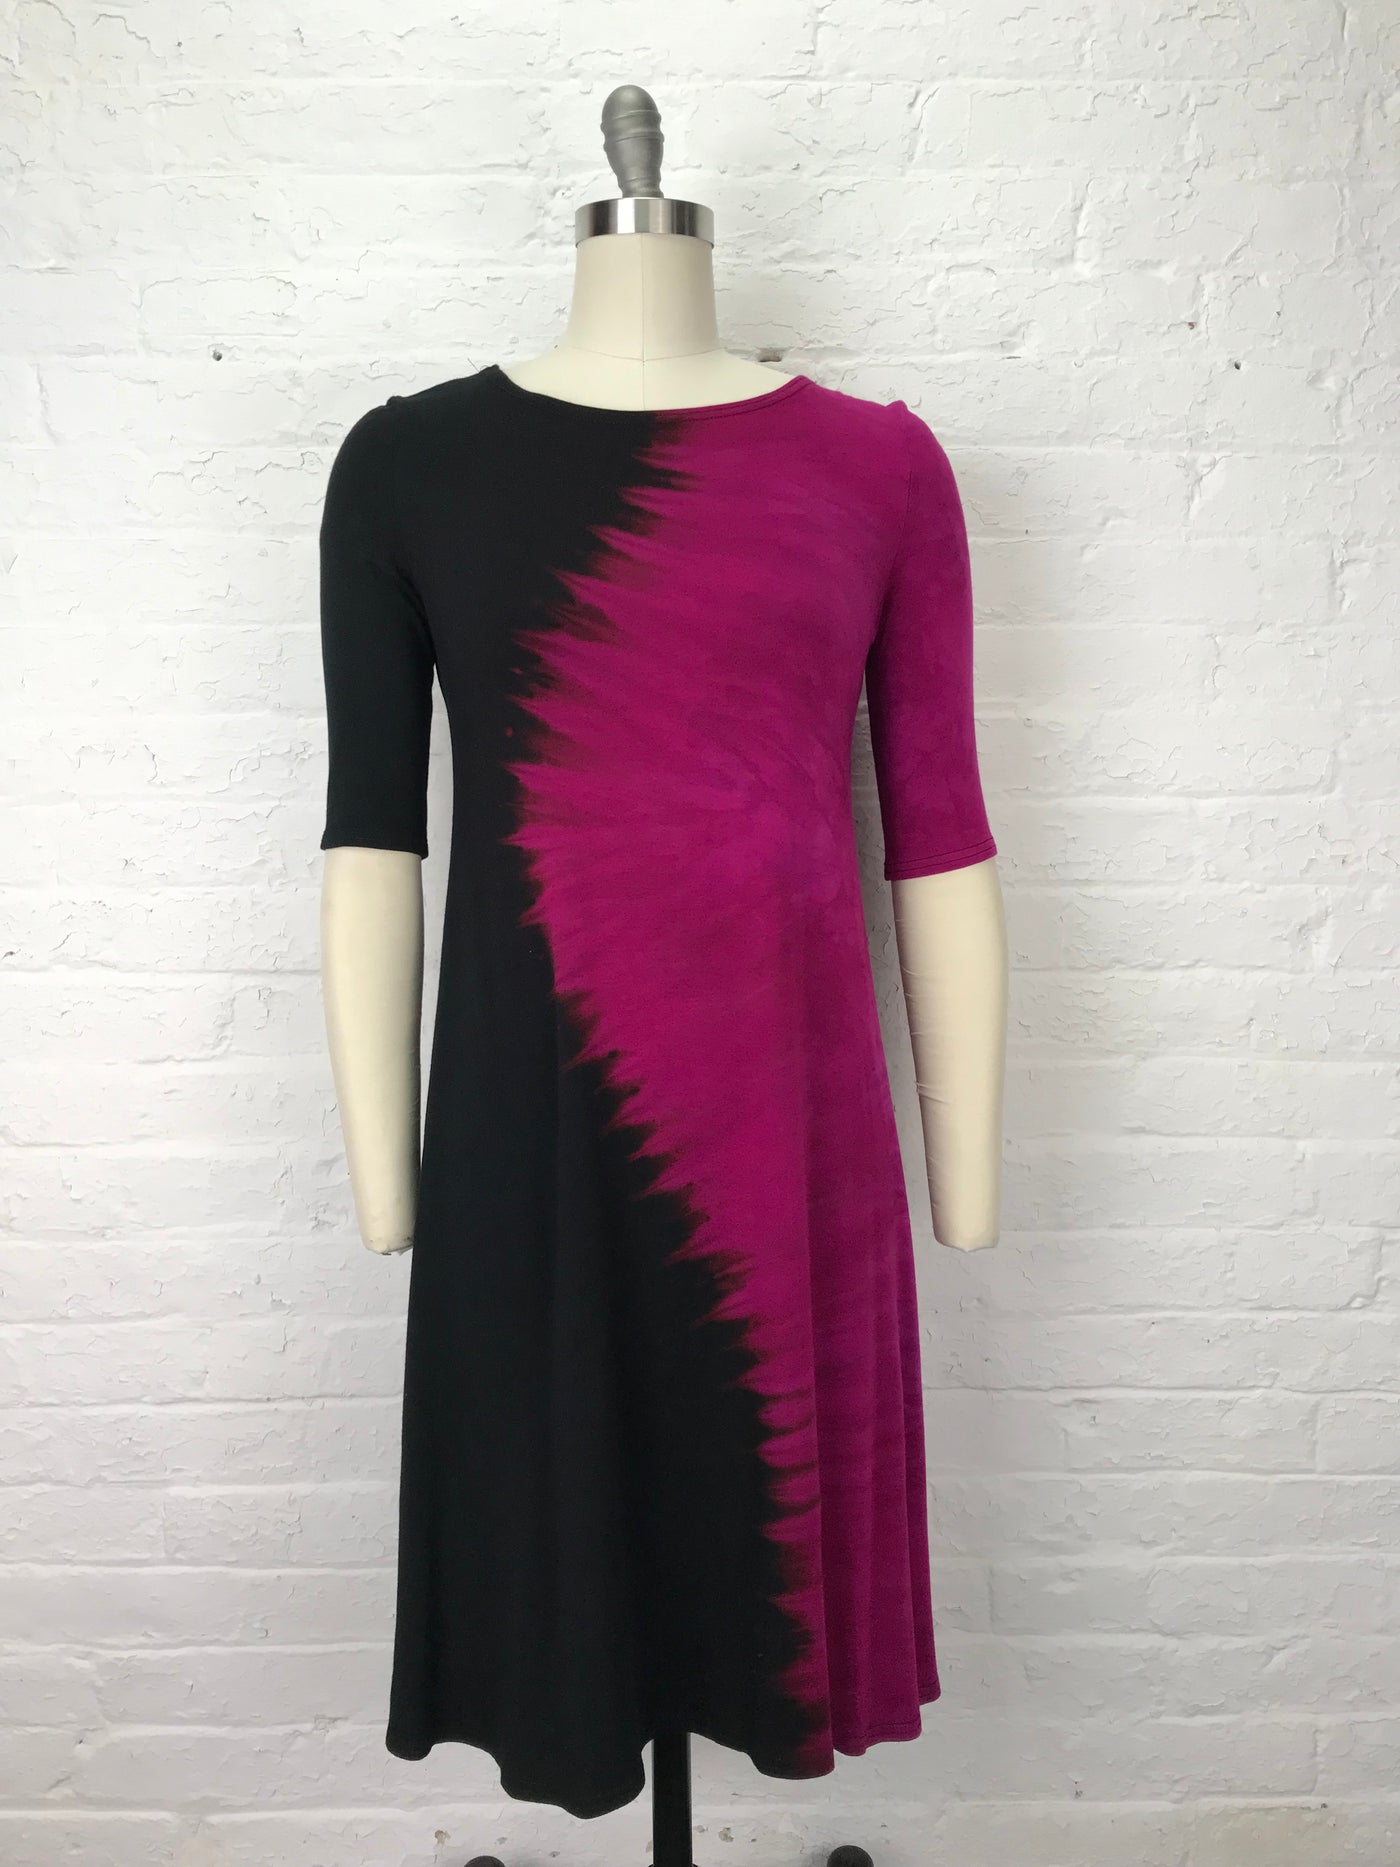 Lucille Dress in Hot Pink Yin Yang